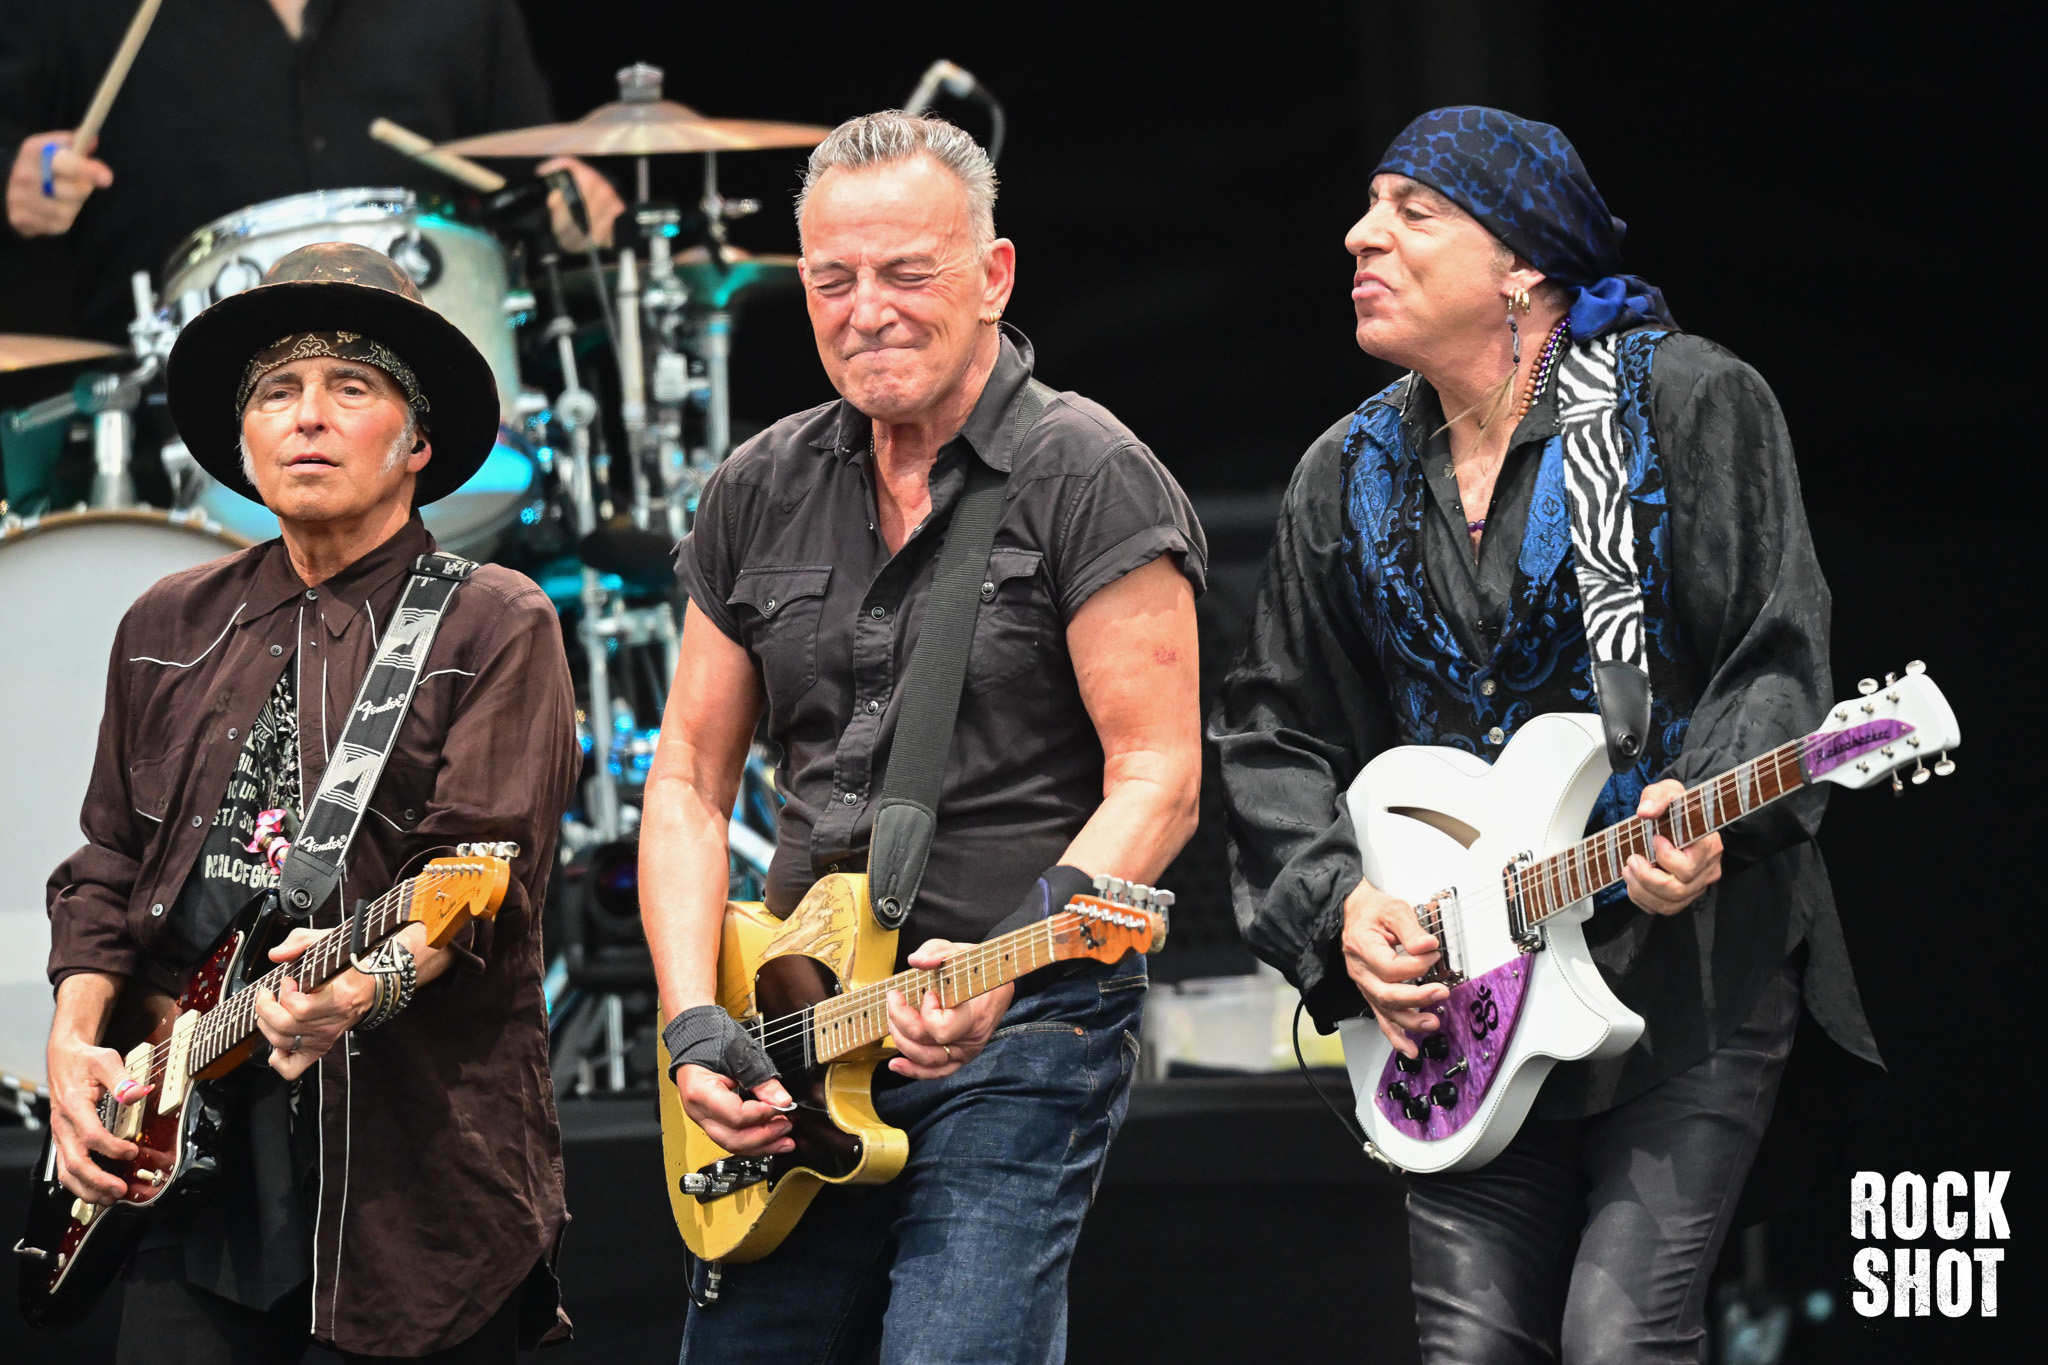 Nils Lofgren, Bruce Springsteen and Steven Van Zandt of the E Street Band perform on stage on Day 9 of American Express Presents BST Hyde Park on July 8, 2023 in London, United, Kingdom. (Photo by Dave Hogan/Hogan Media/Shutterstock)